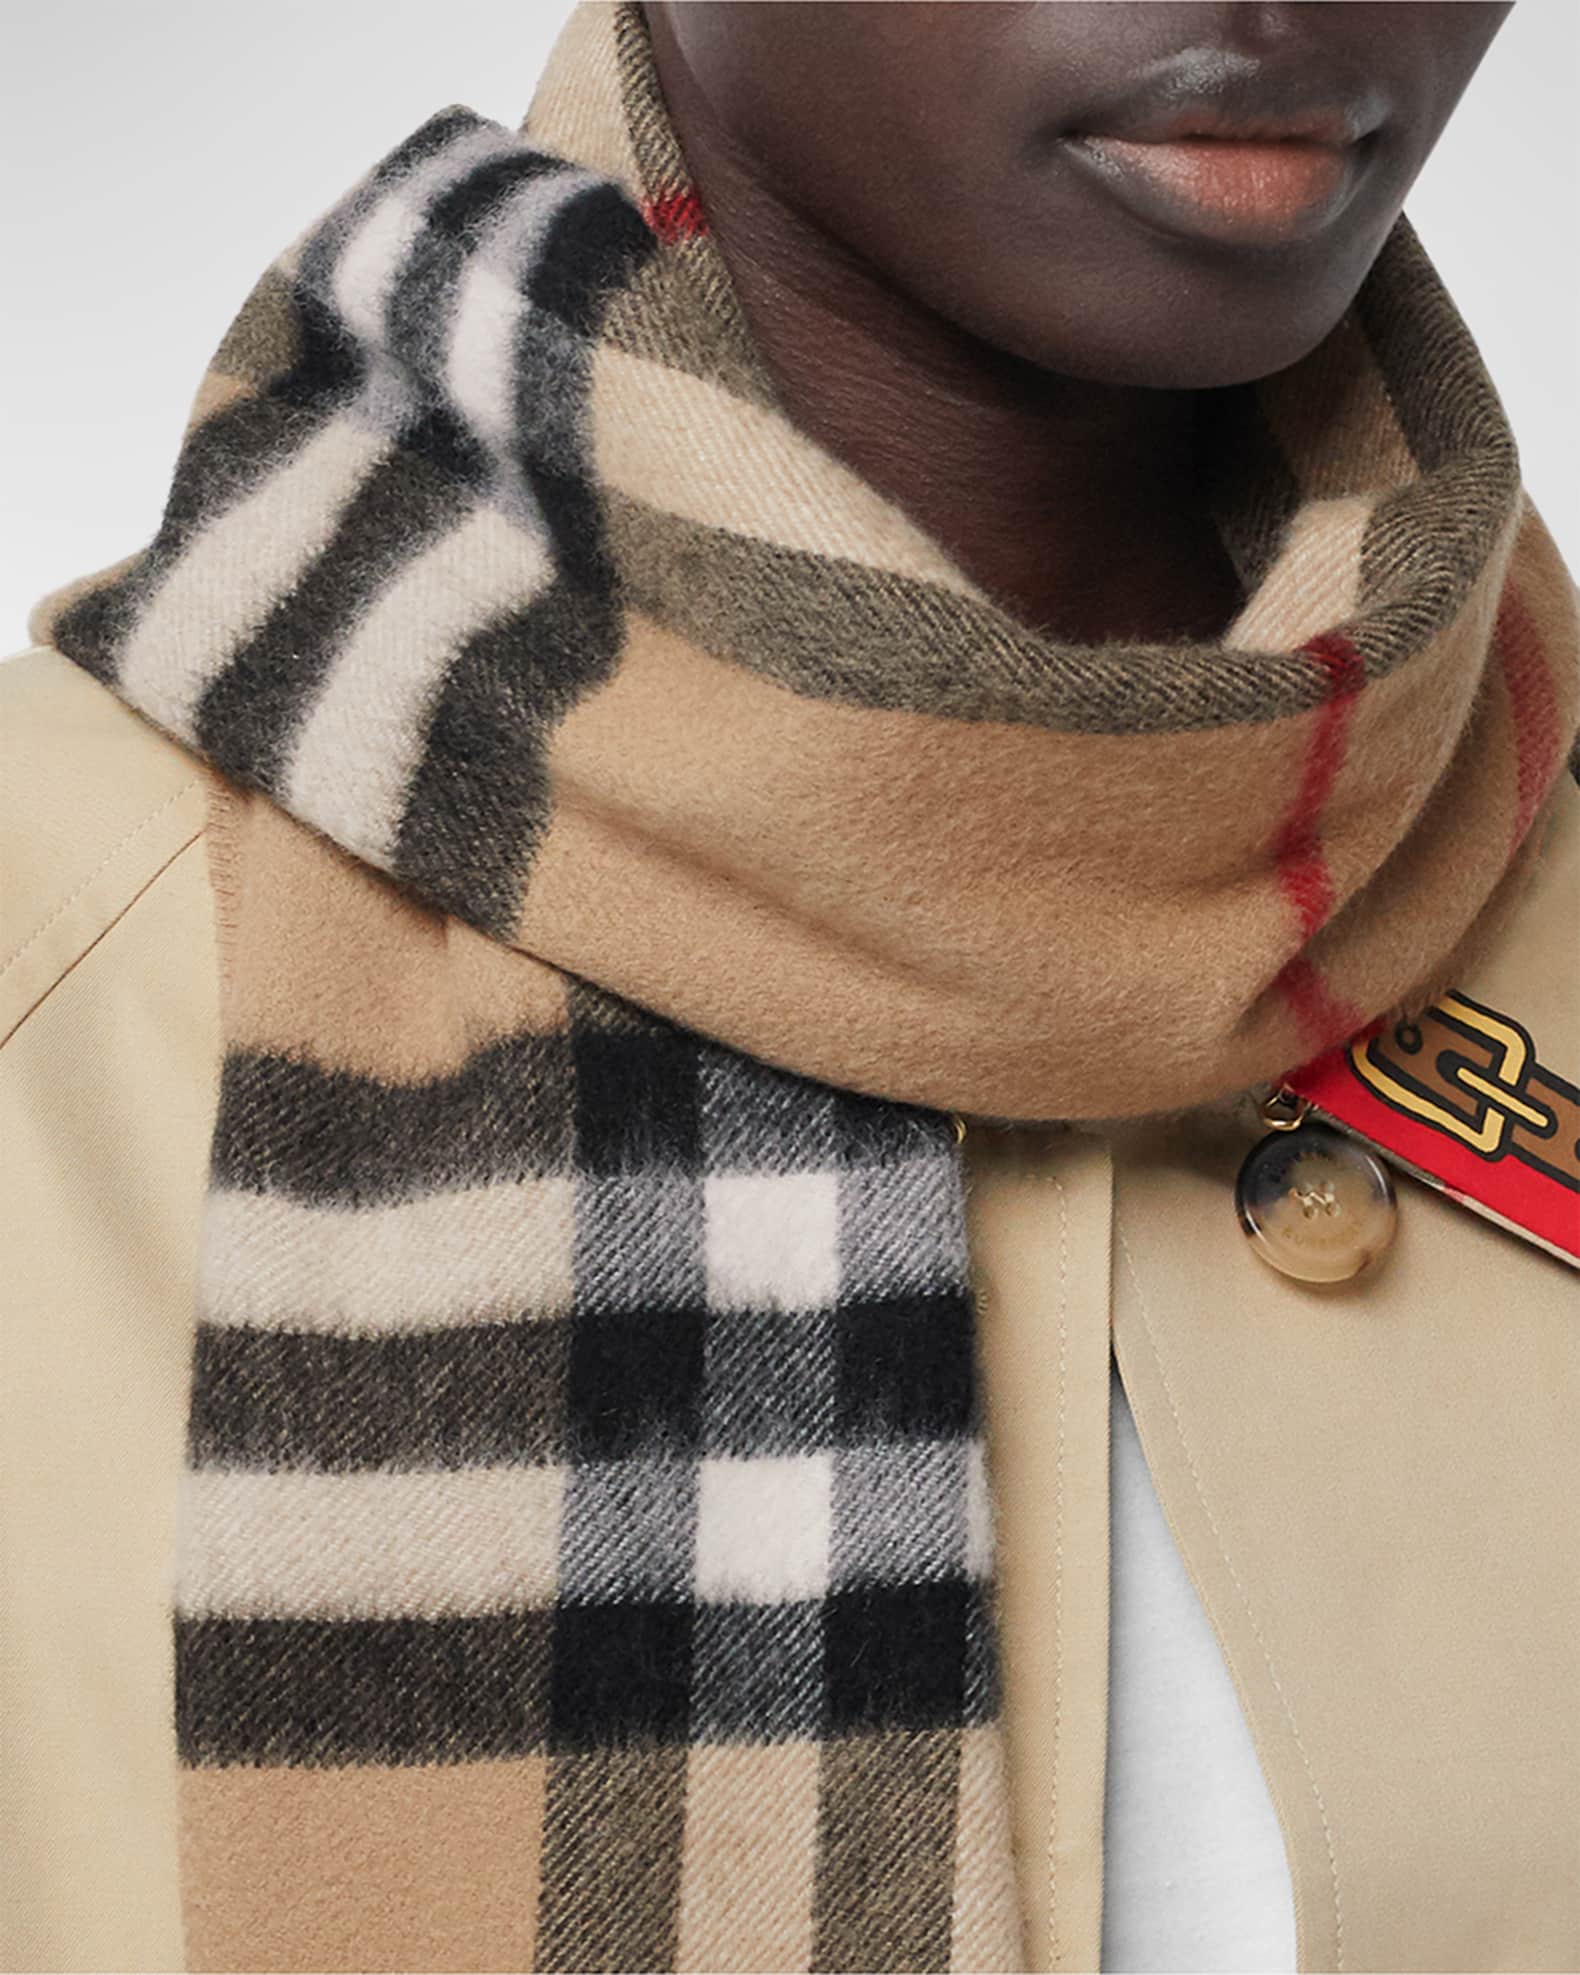 Burberry Two-Tone Checked Cashmere Scarf - Brown